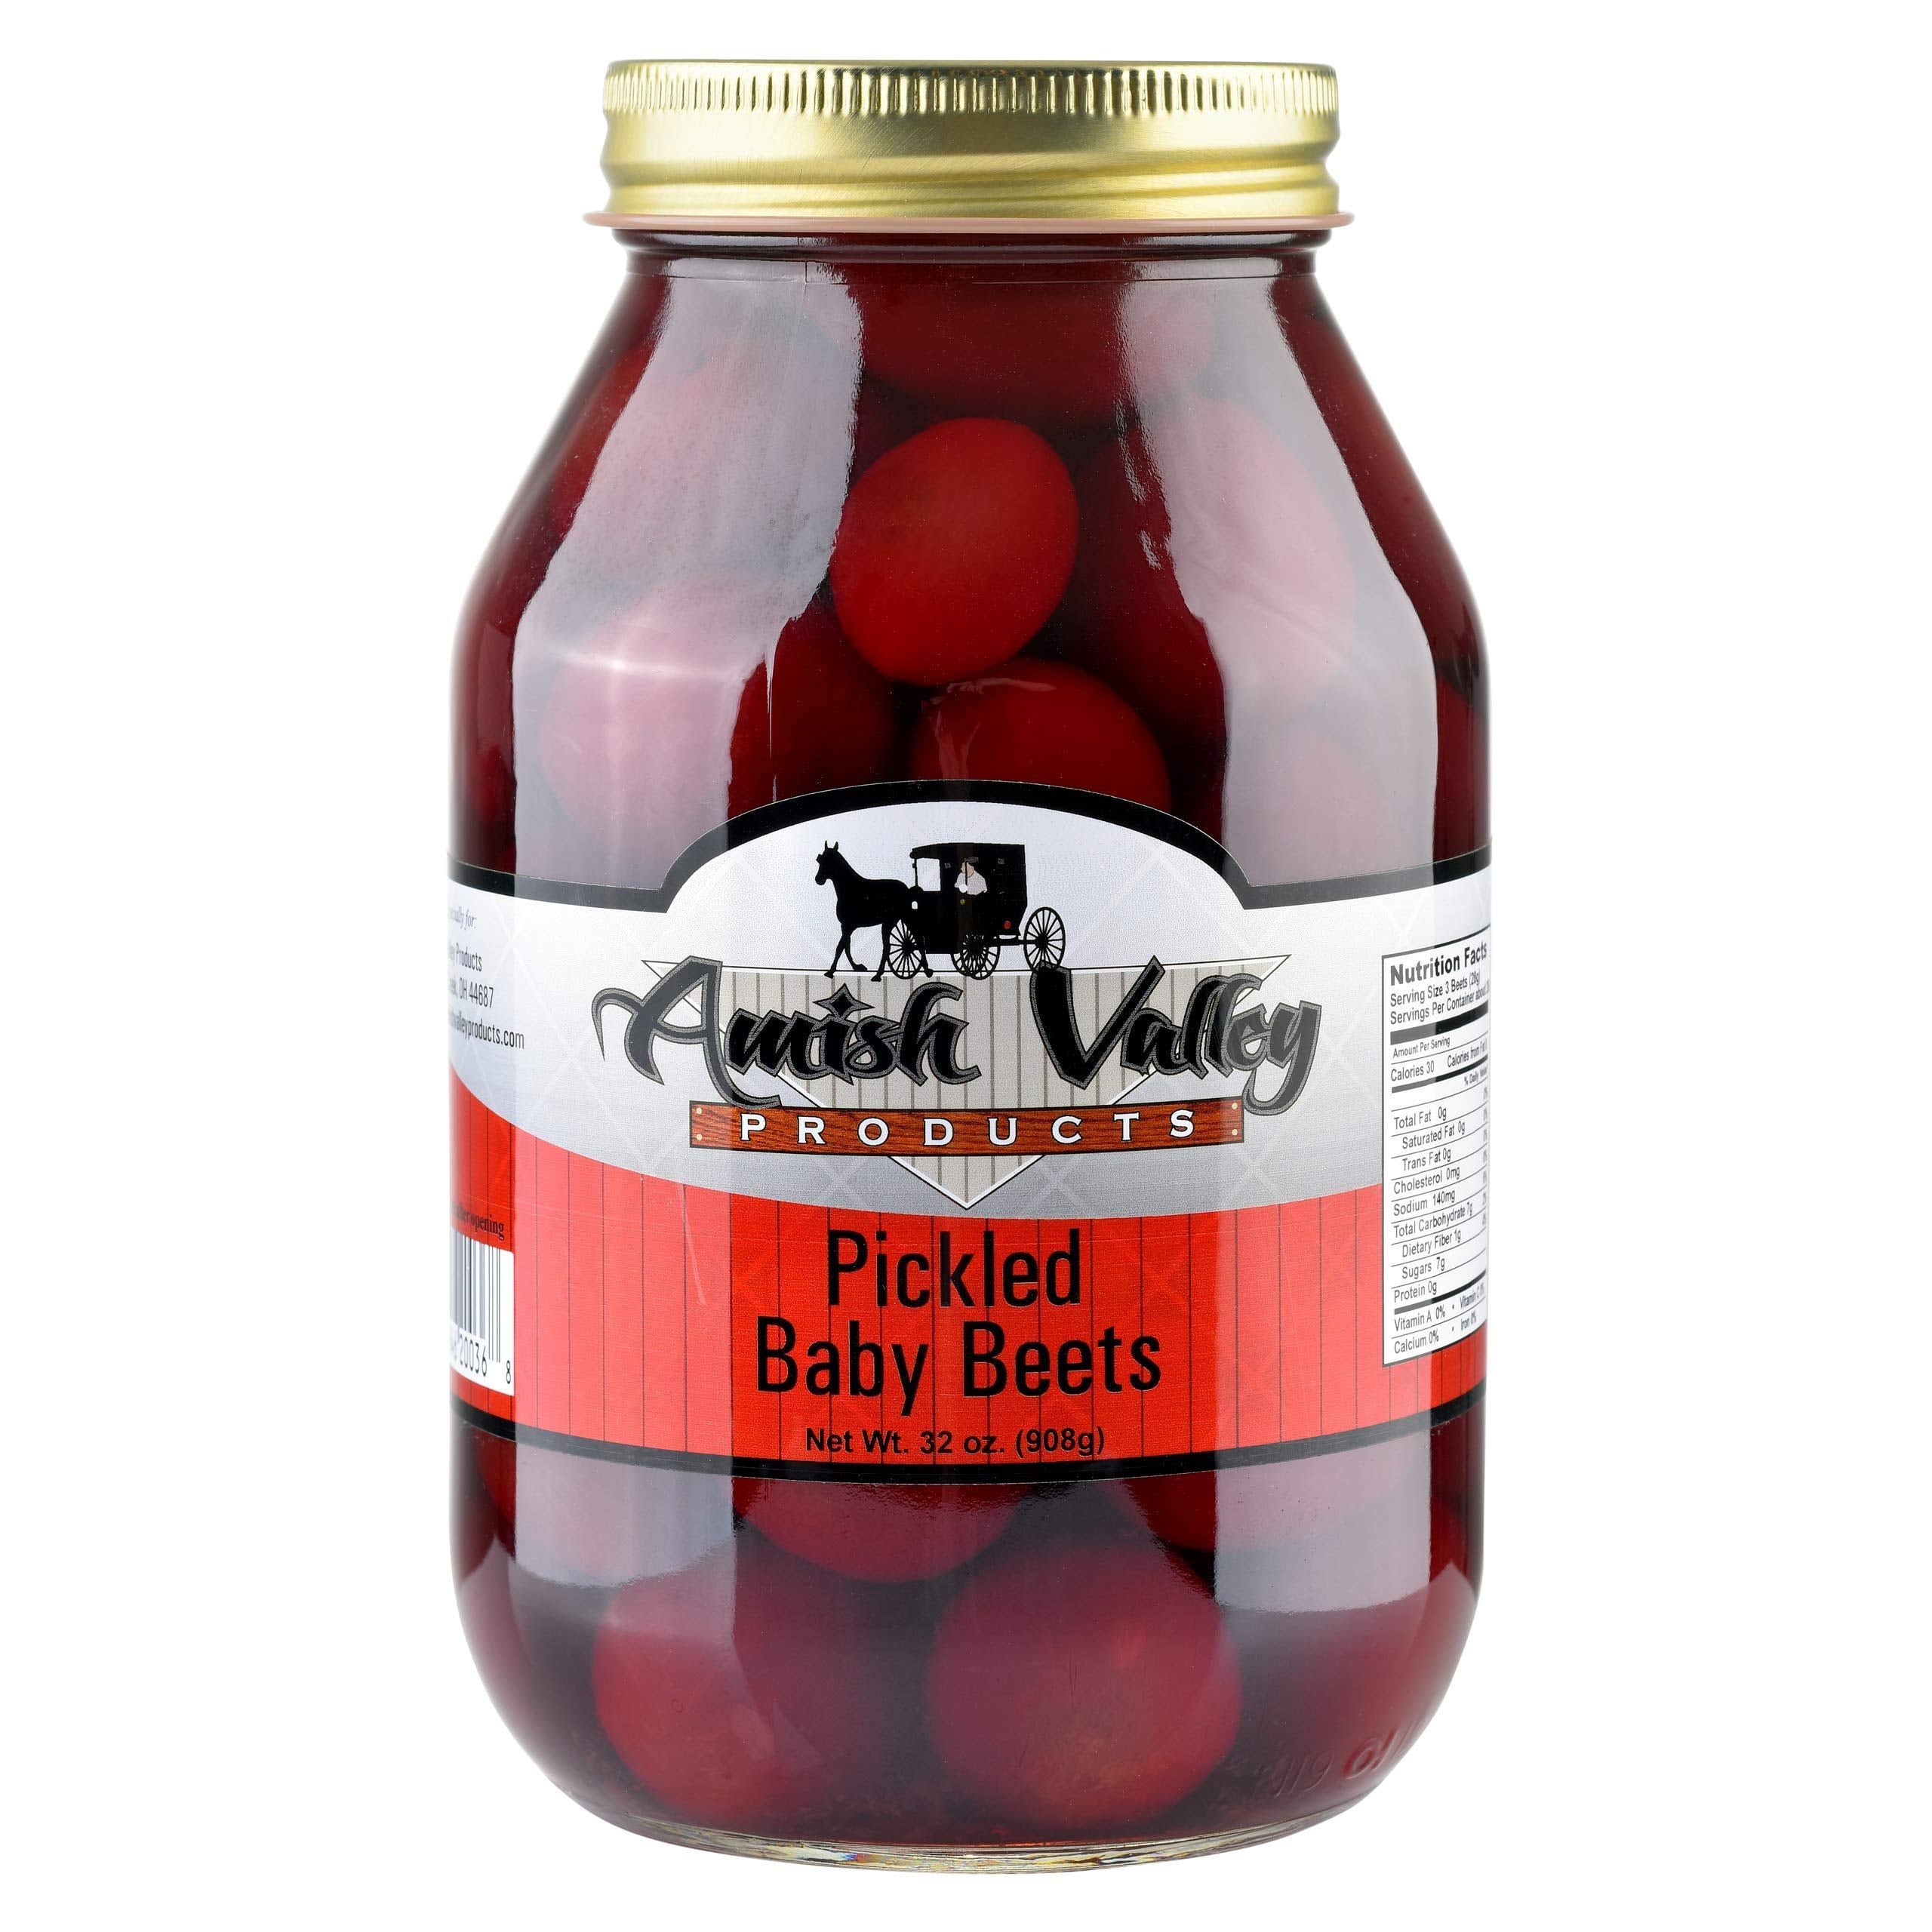 Amish Valley Products Pickled Baby Beets 32oz. Glass Jar (1 Quart Jar